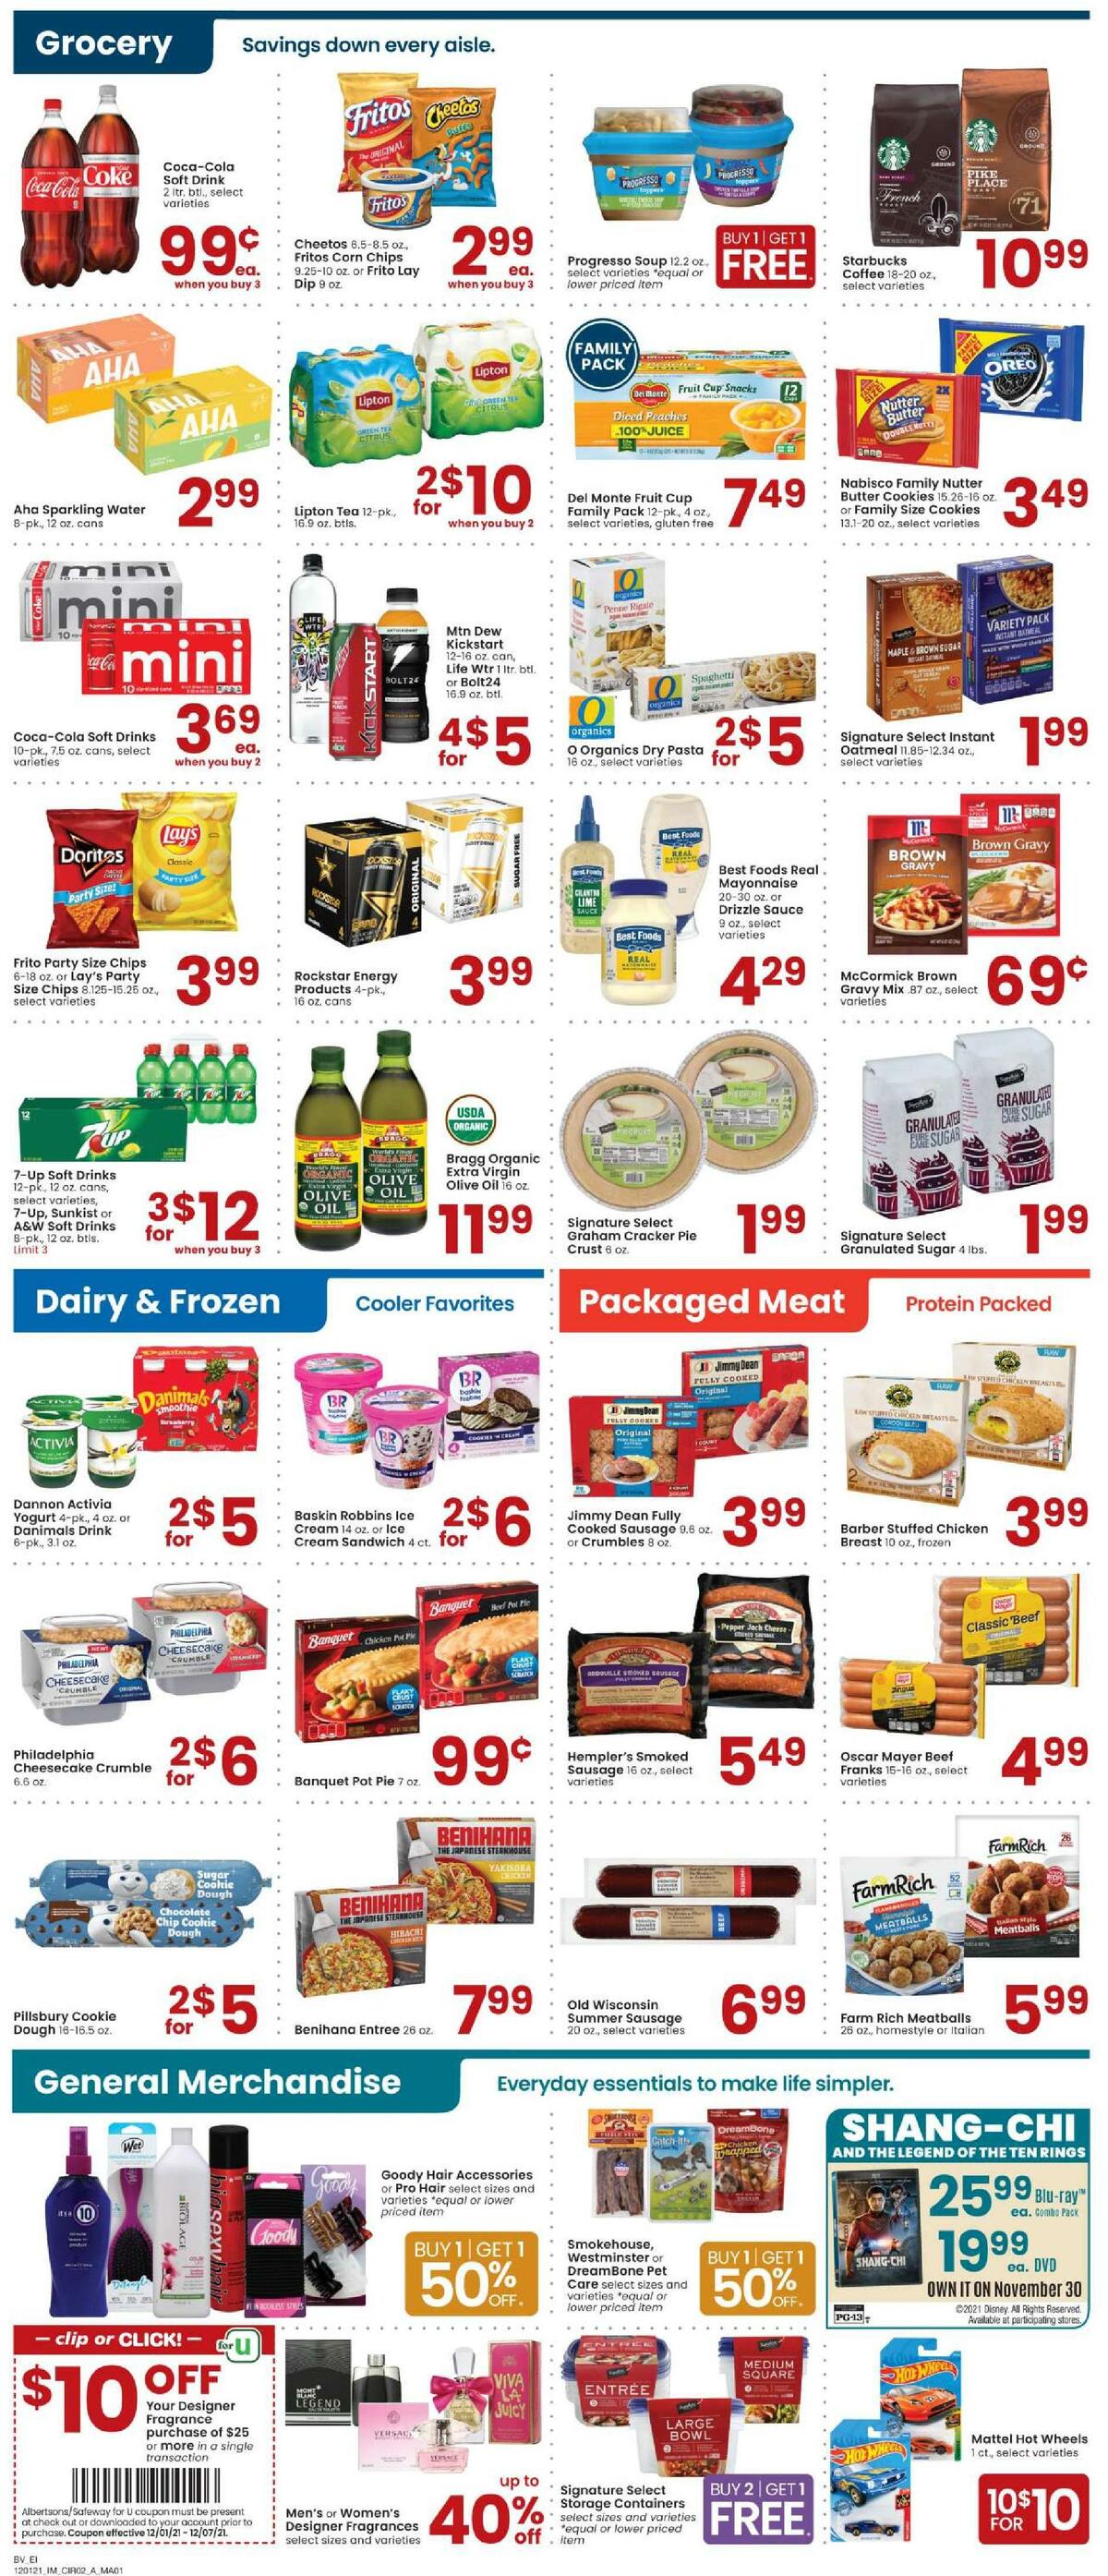 Albertsons Weekly Ad from December 1